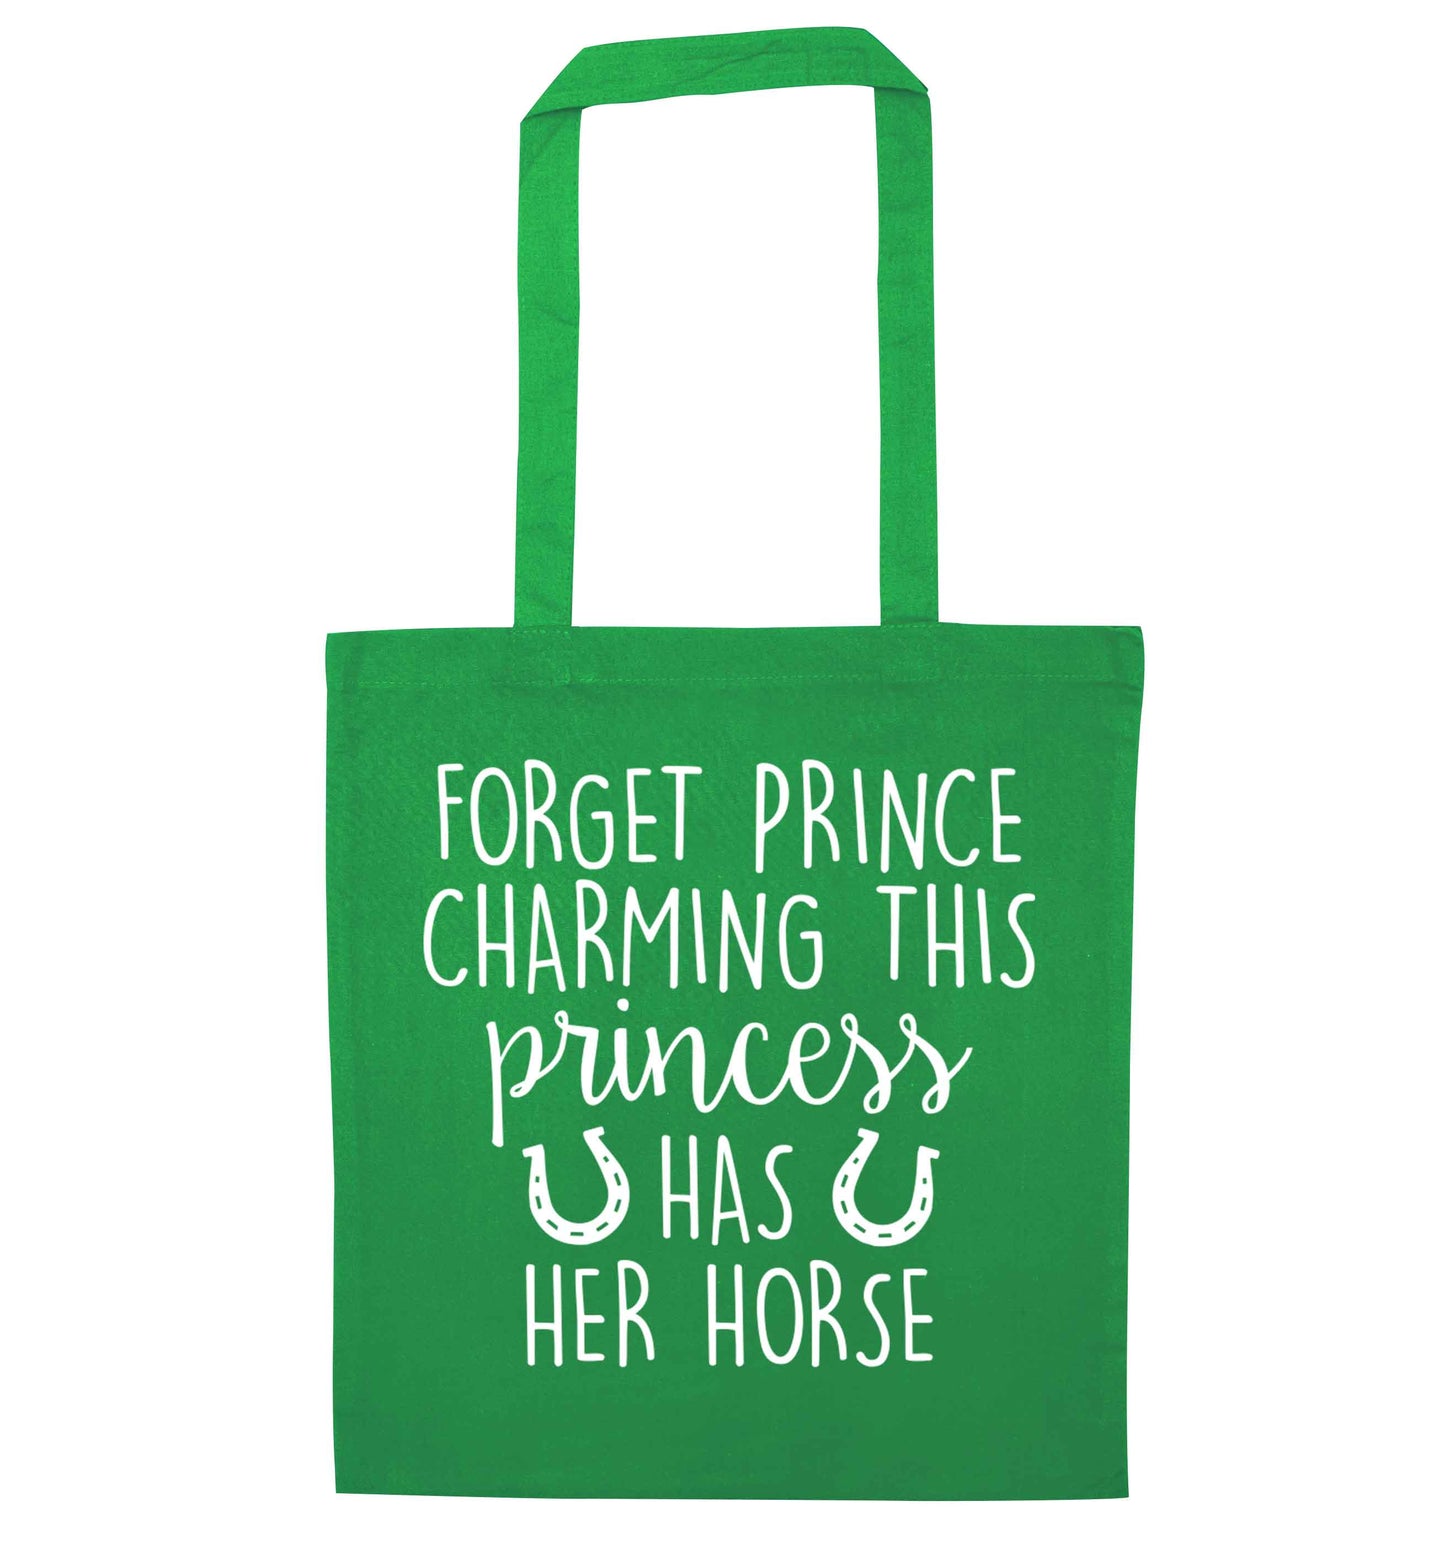 Forget prince charming this princess has her horse green tote bag